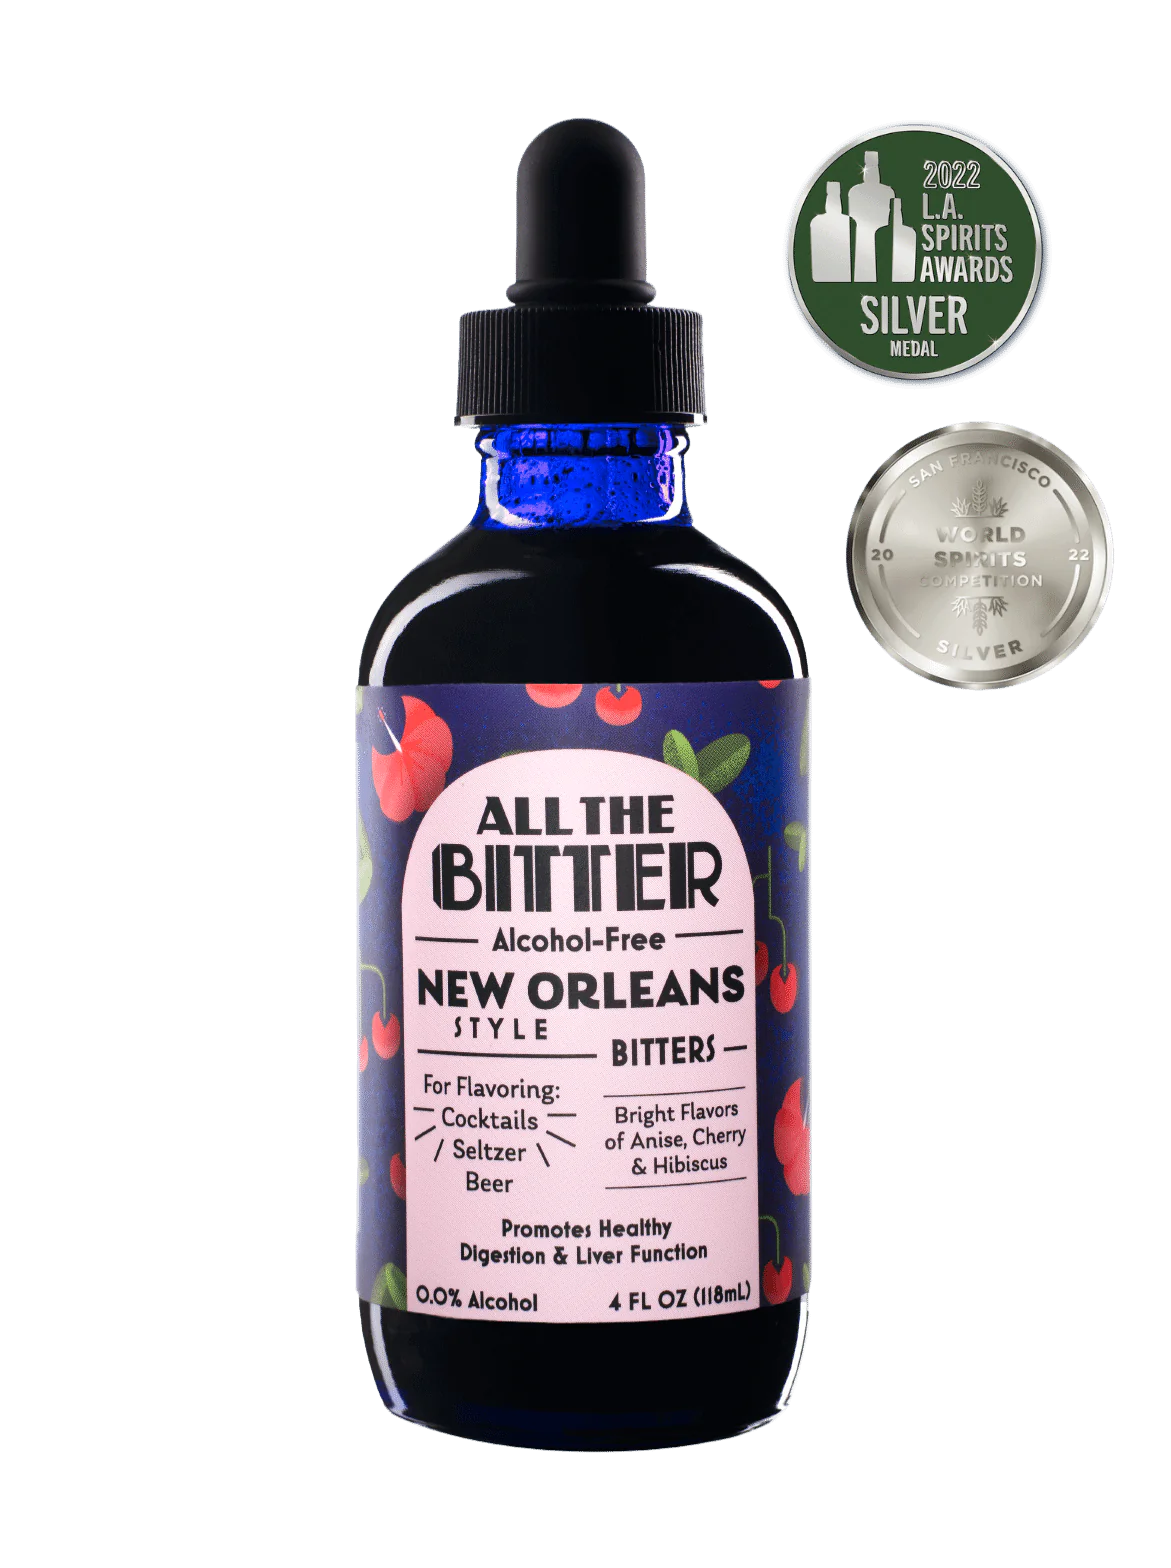 All The Bitter - New Orleans Bitters (Non-Alcoholic)